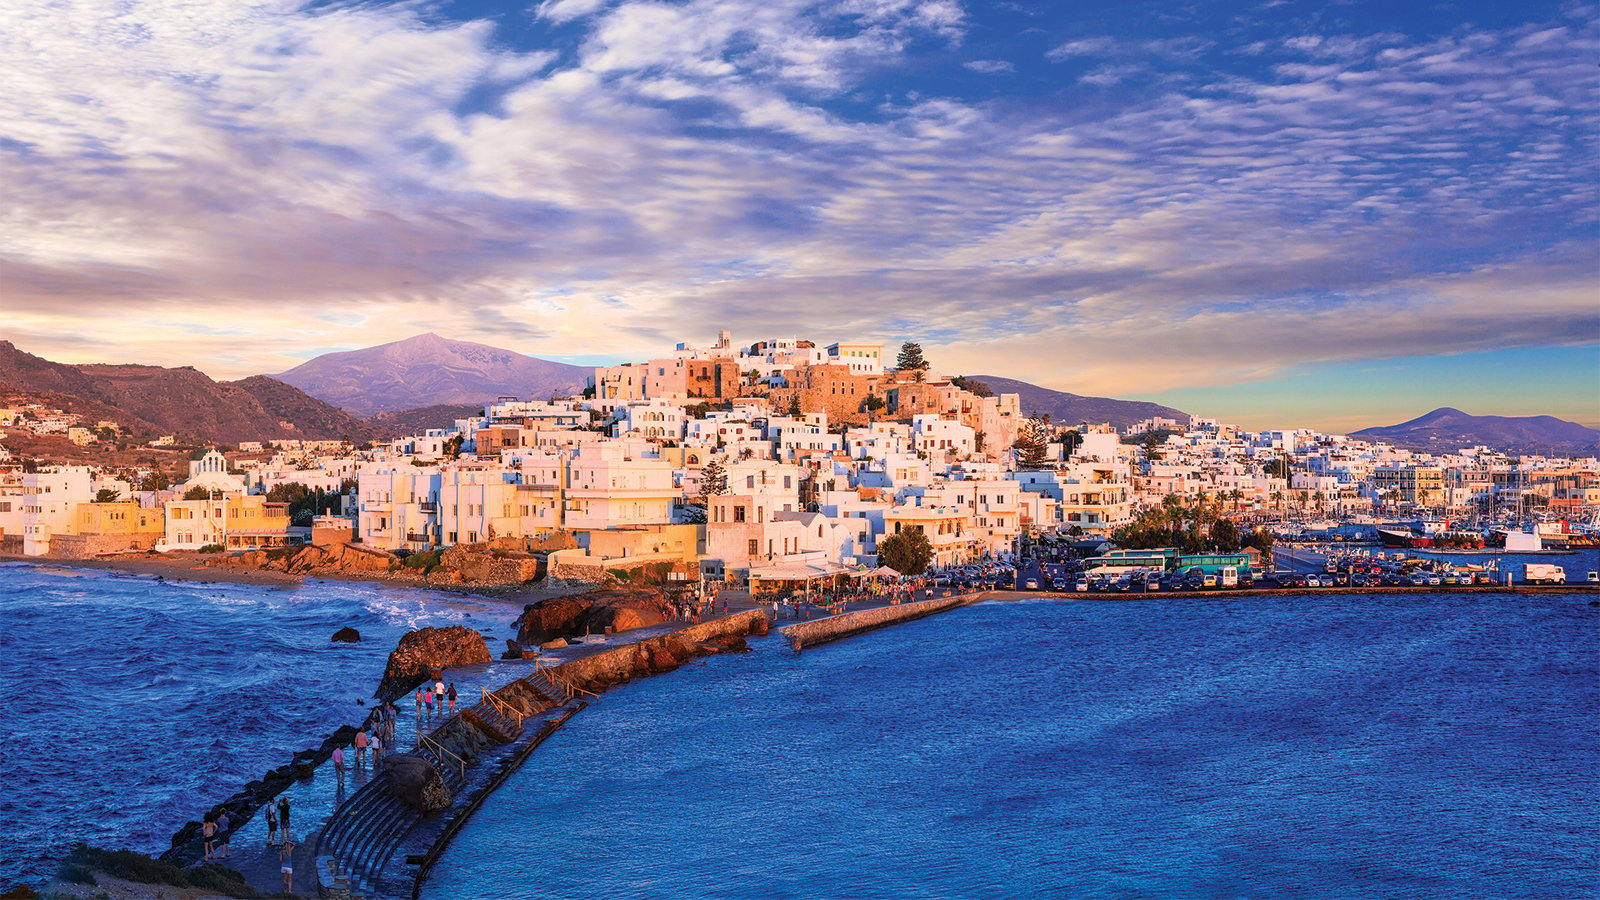 NAXOS is one of the top 10 islands that travelers are looking to visit in Greece